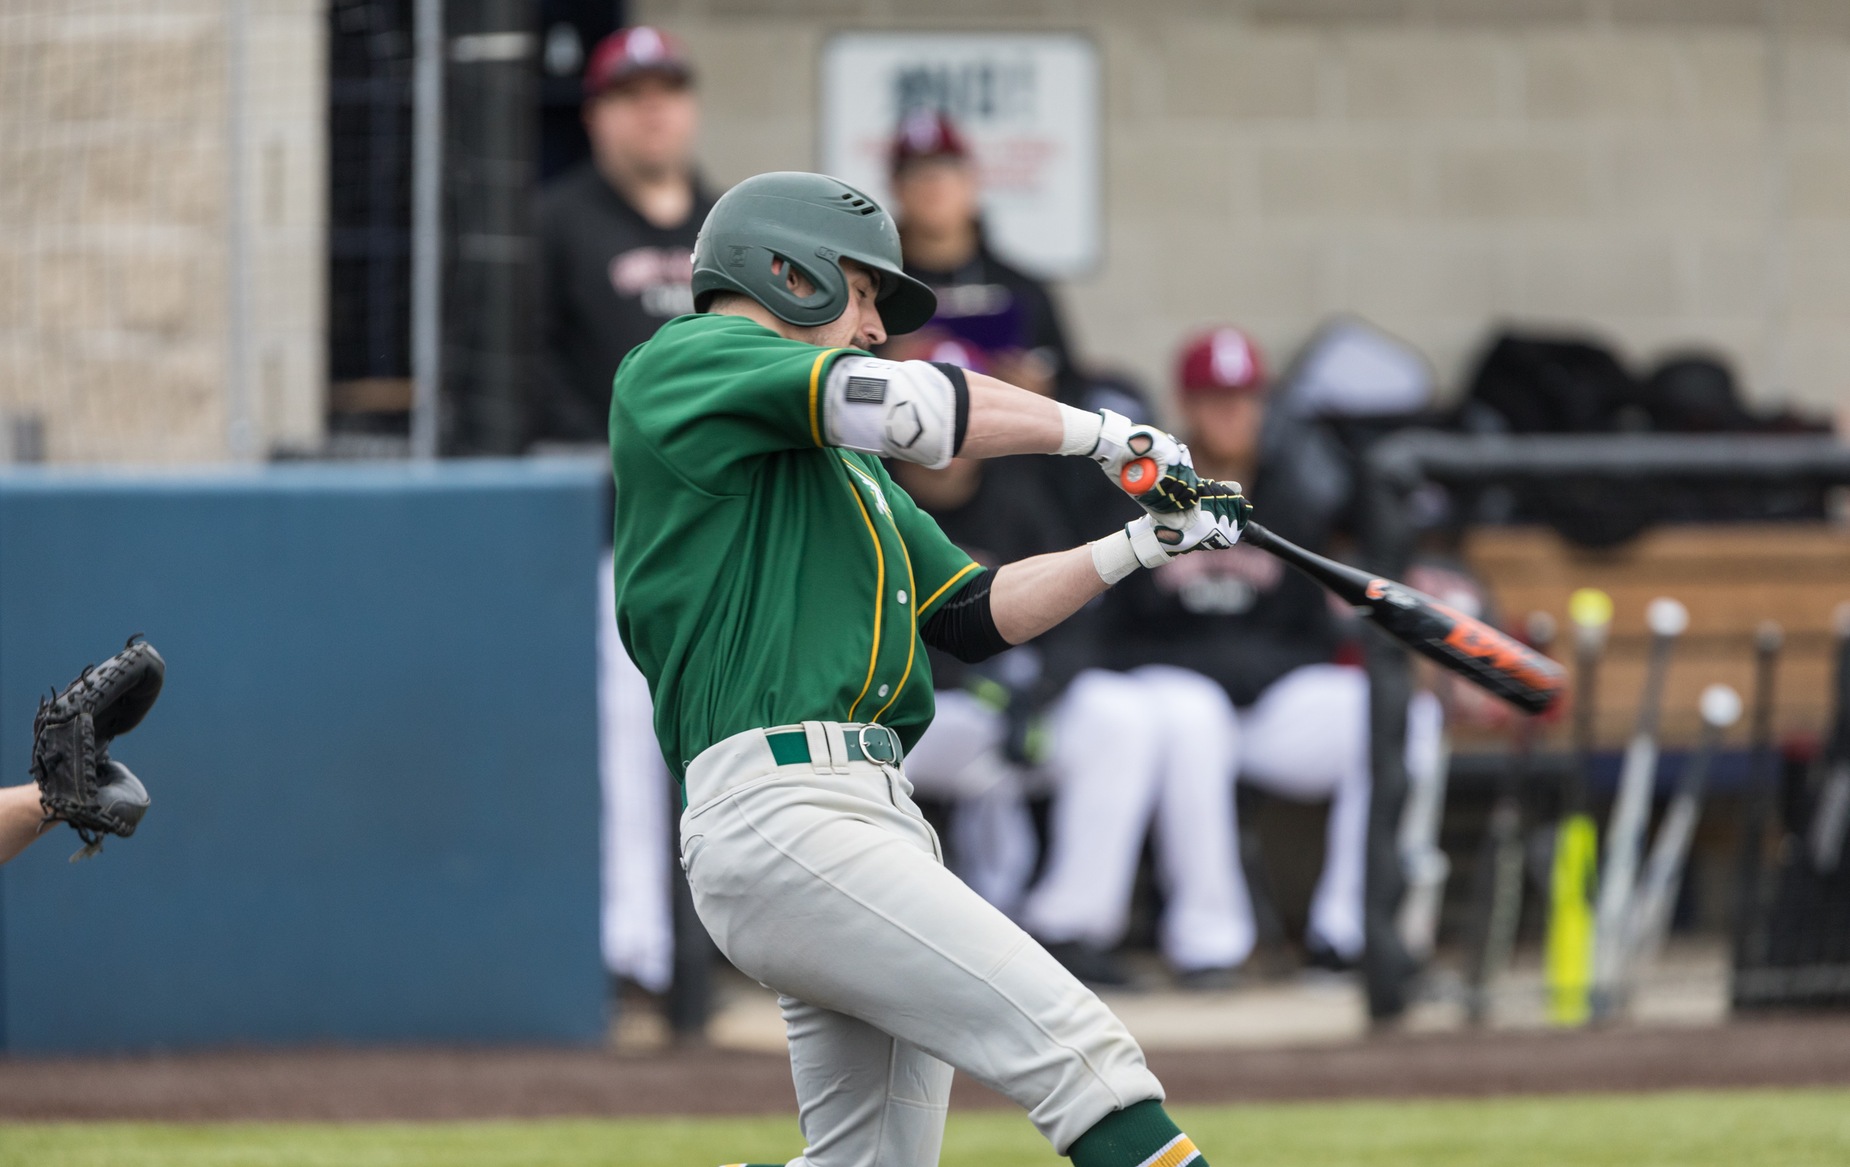 Falcons Edged By Engineers, 6-4 (11 Inn)